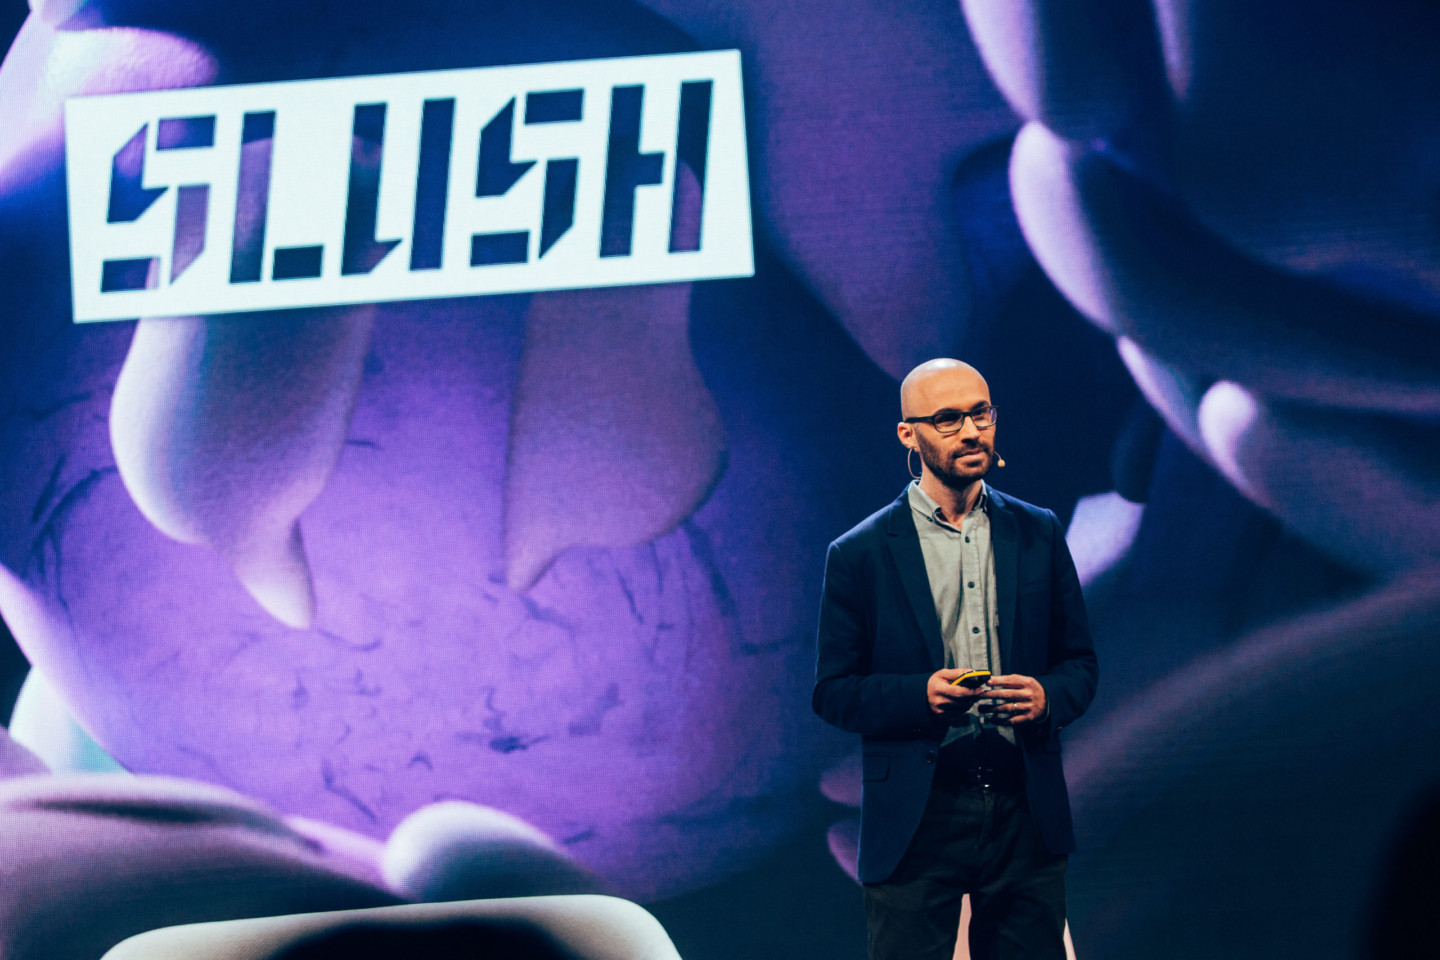 You are currently viewing Slush 19 – Fantastic achievement for Largo in a fascinating ambiance